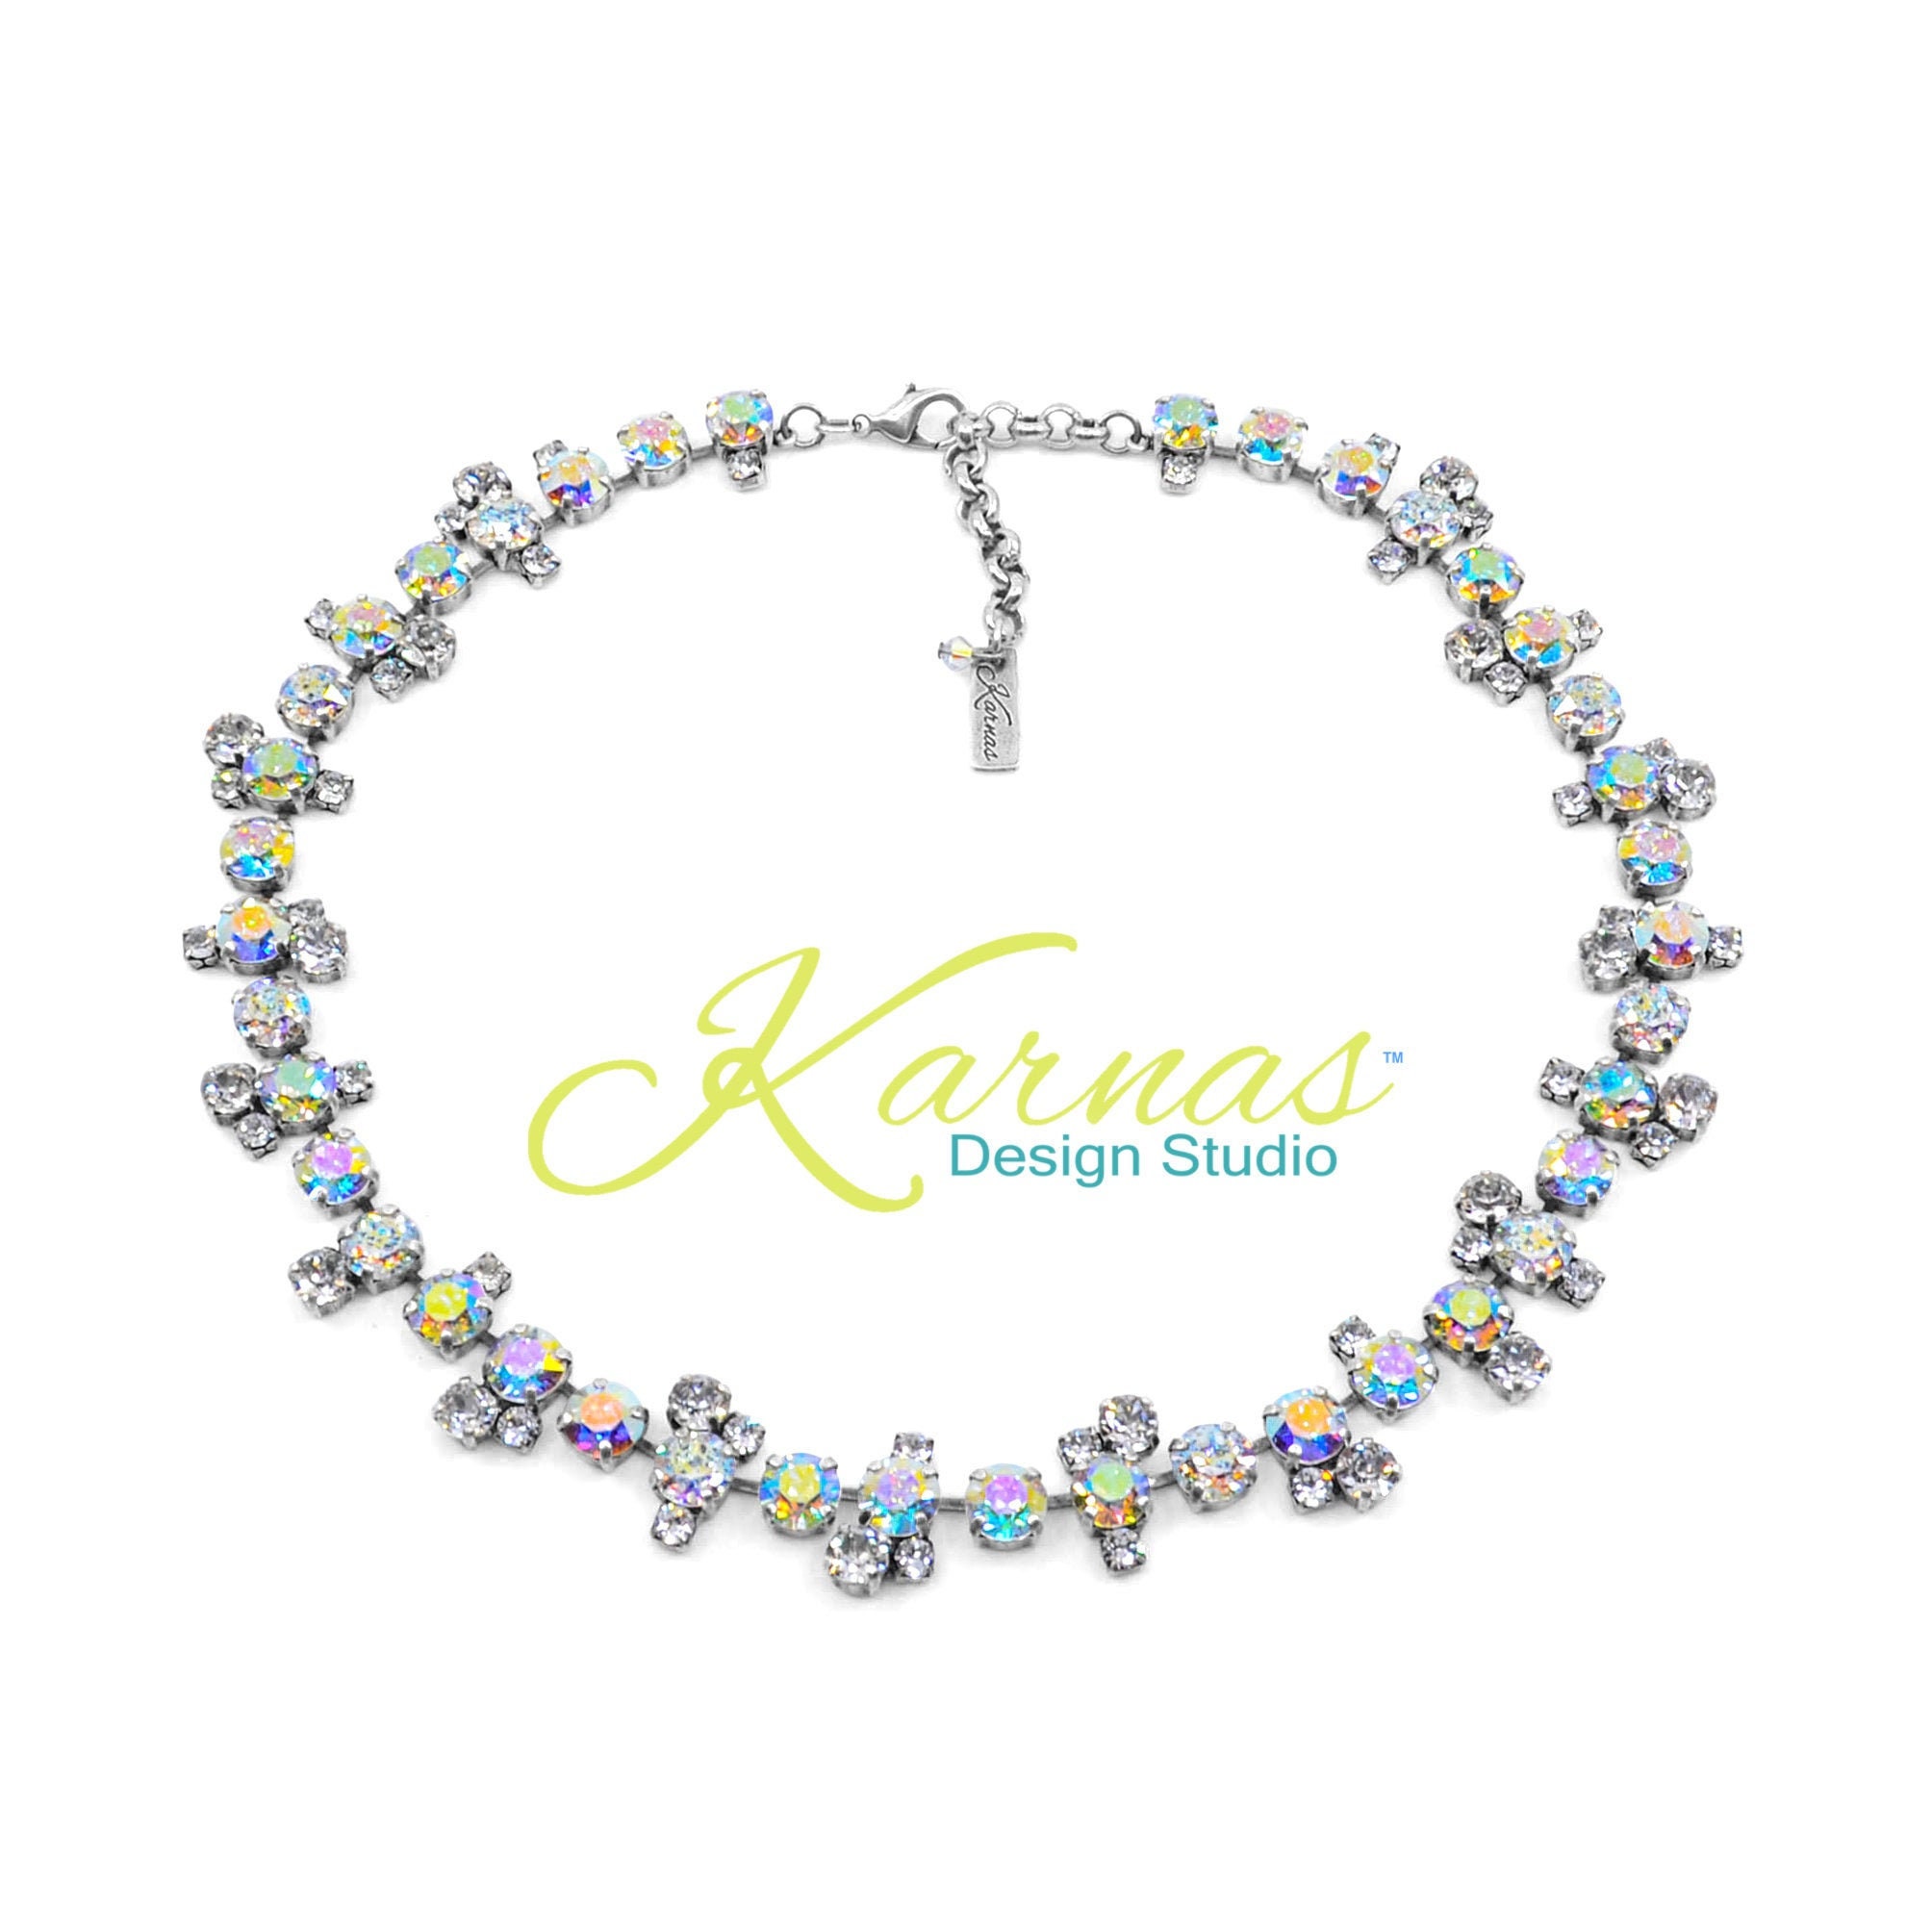 Crystal Conglomeration Mixed Size Statement Necklace Made With Genuine Crystal Antique Silver Karnas Design Studio Free Shipping